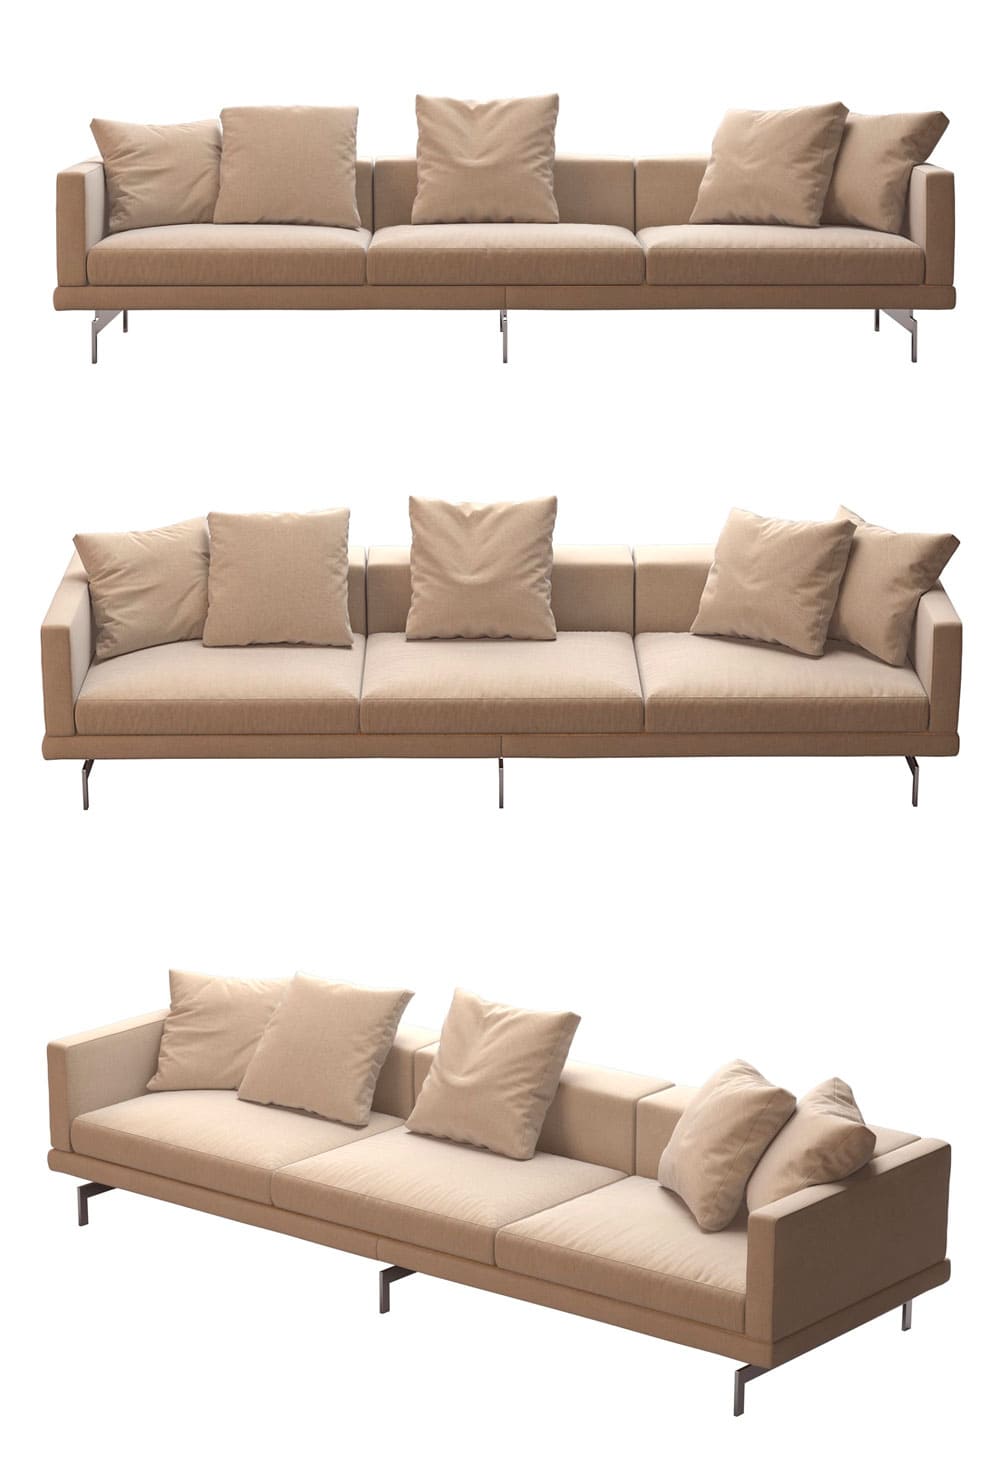 Dock sofa by bb italia 295x99, picture for pinterest.